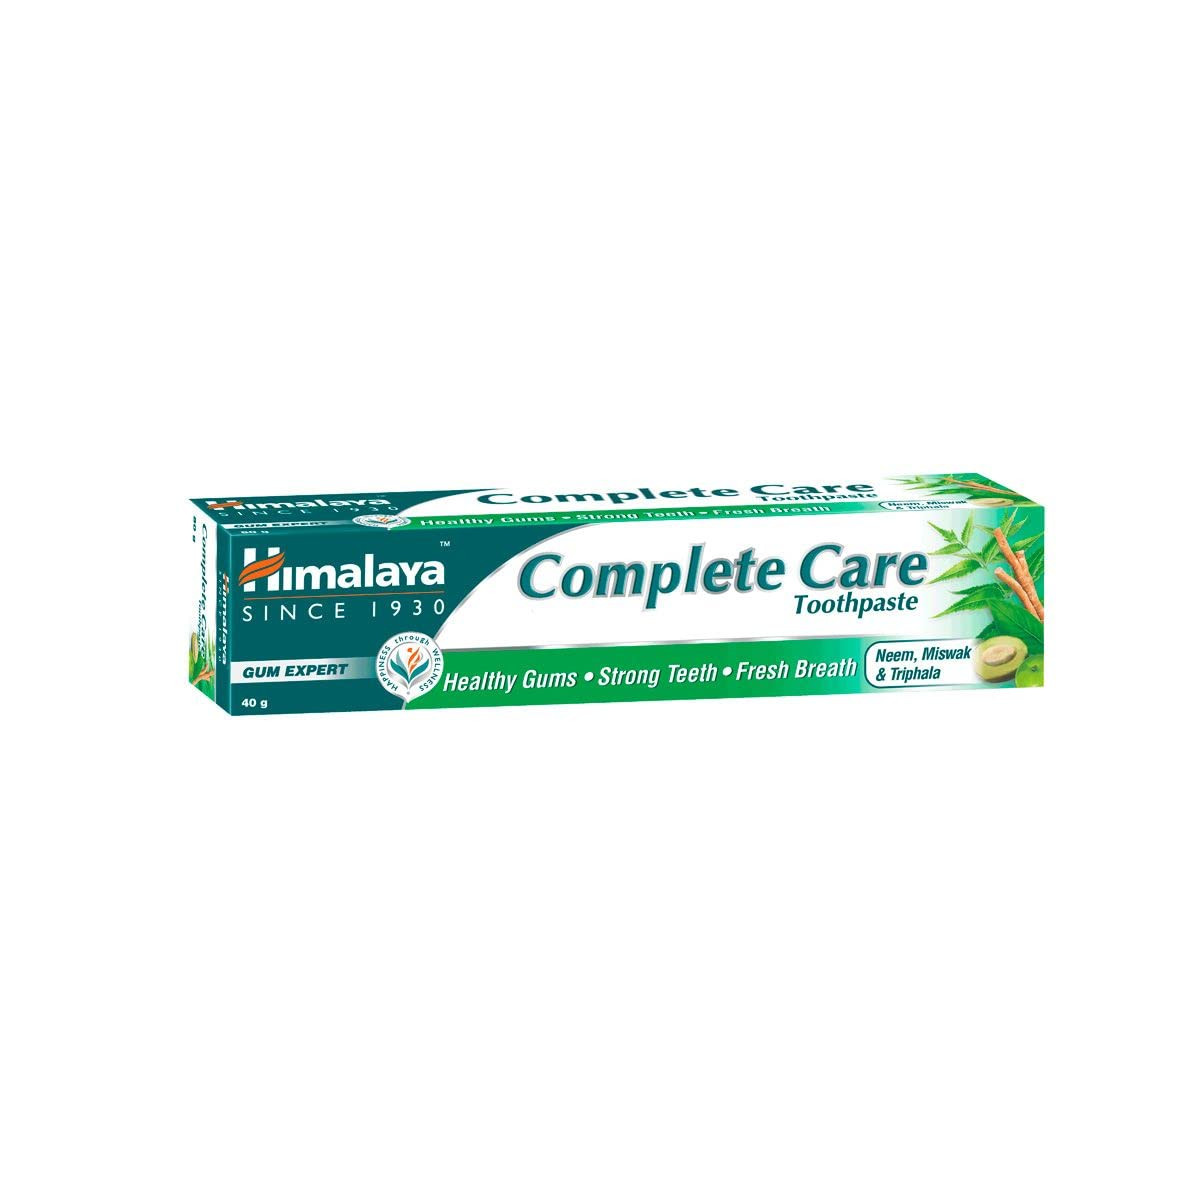 Himalaya Complete Care 300g (150g x 2, Pack of 2) Toothpaste | For Healthy Gums & Strong Teeth | With Neem, Miswak & Triphala